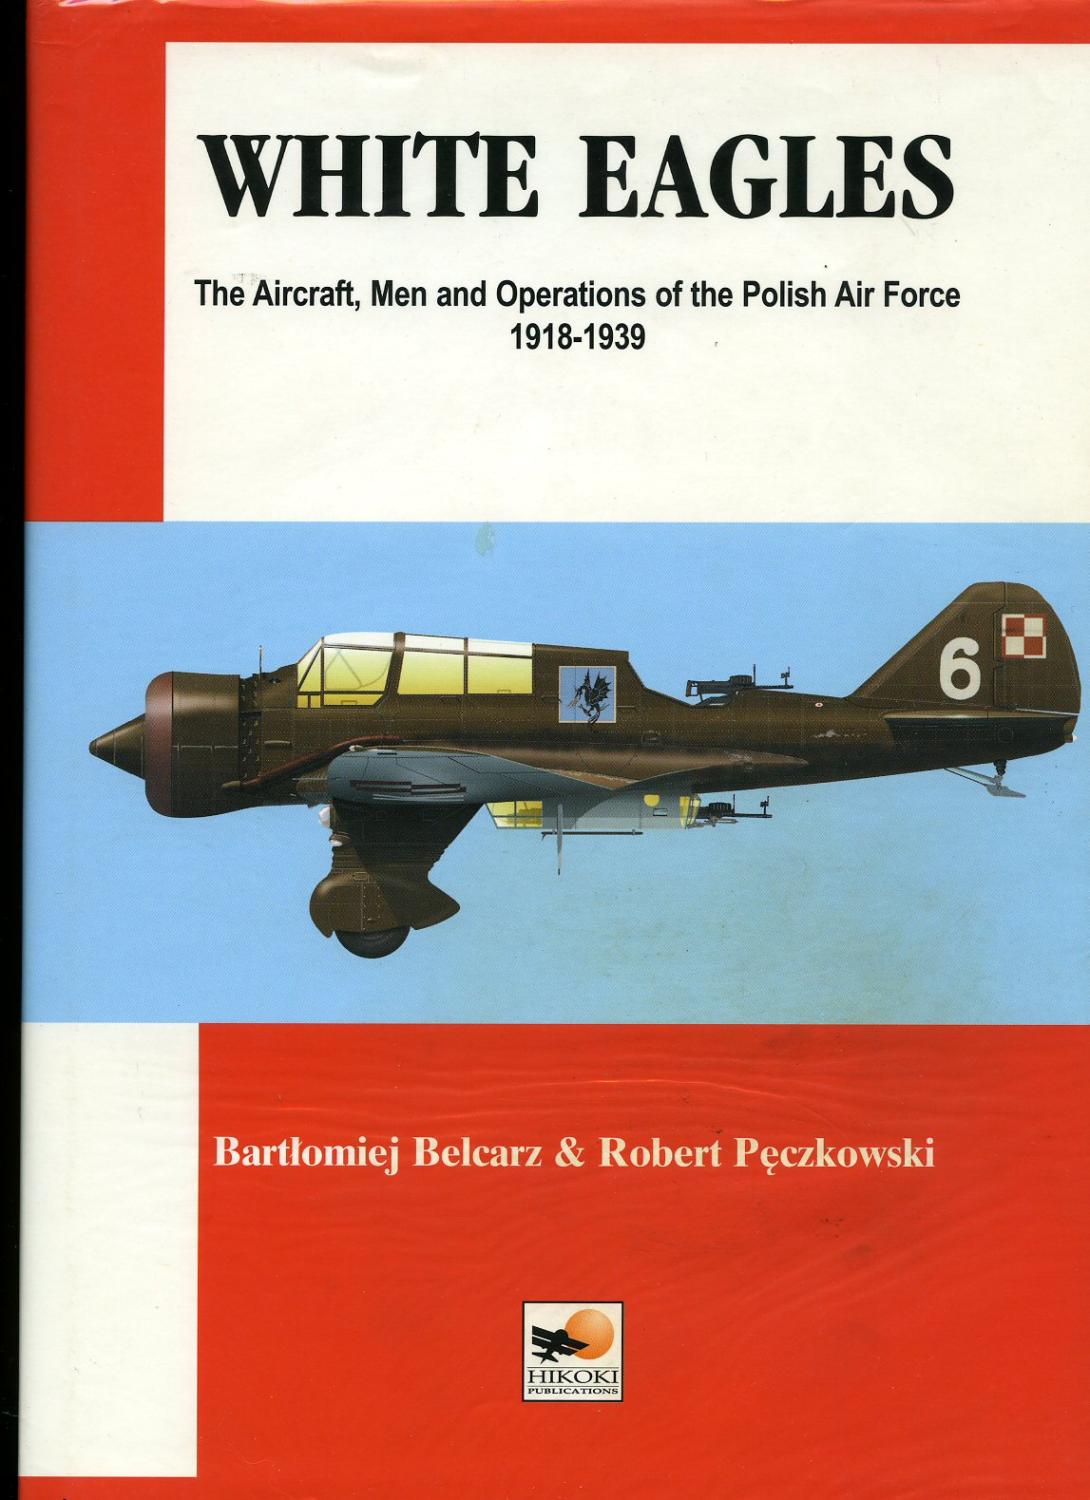 White Eagles; The Aircraft, Men and Operations of the Polish Air Force 1918-1939 - Belcarz, Bartlomiej and Robert Peczkowski